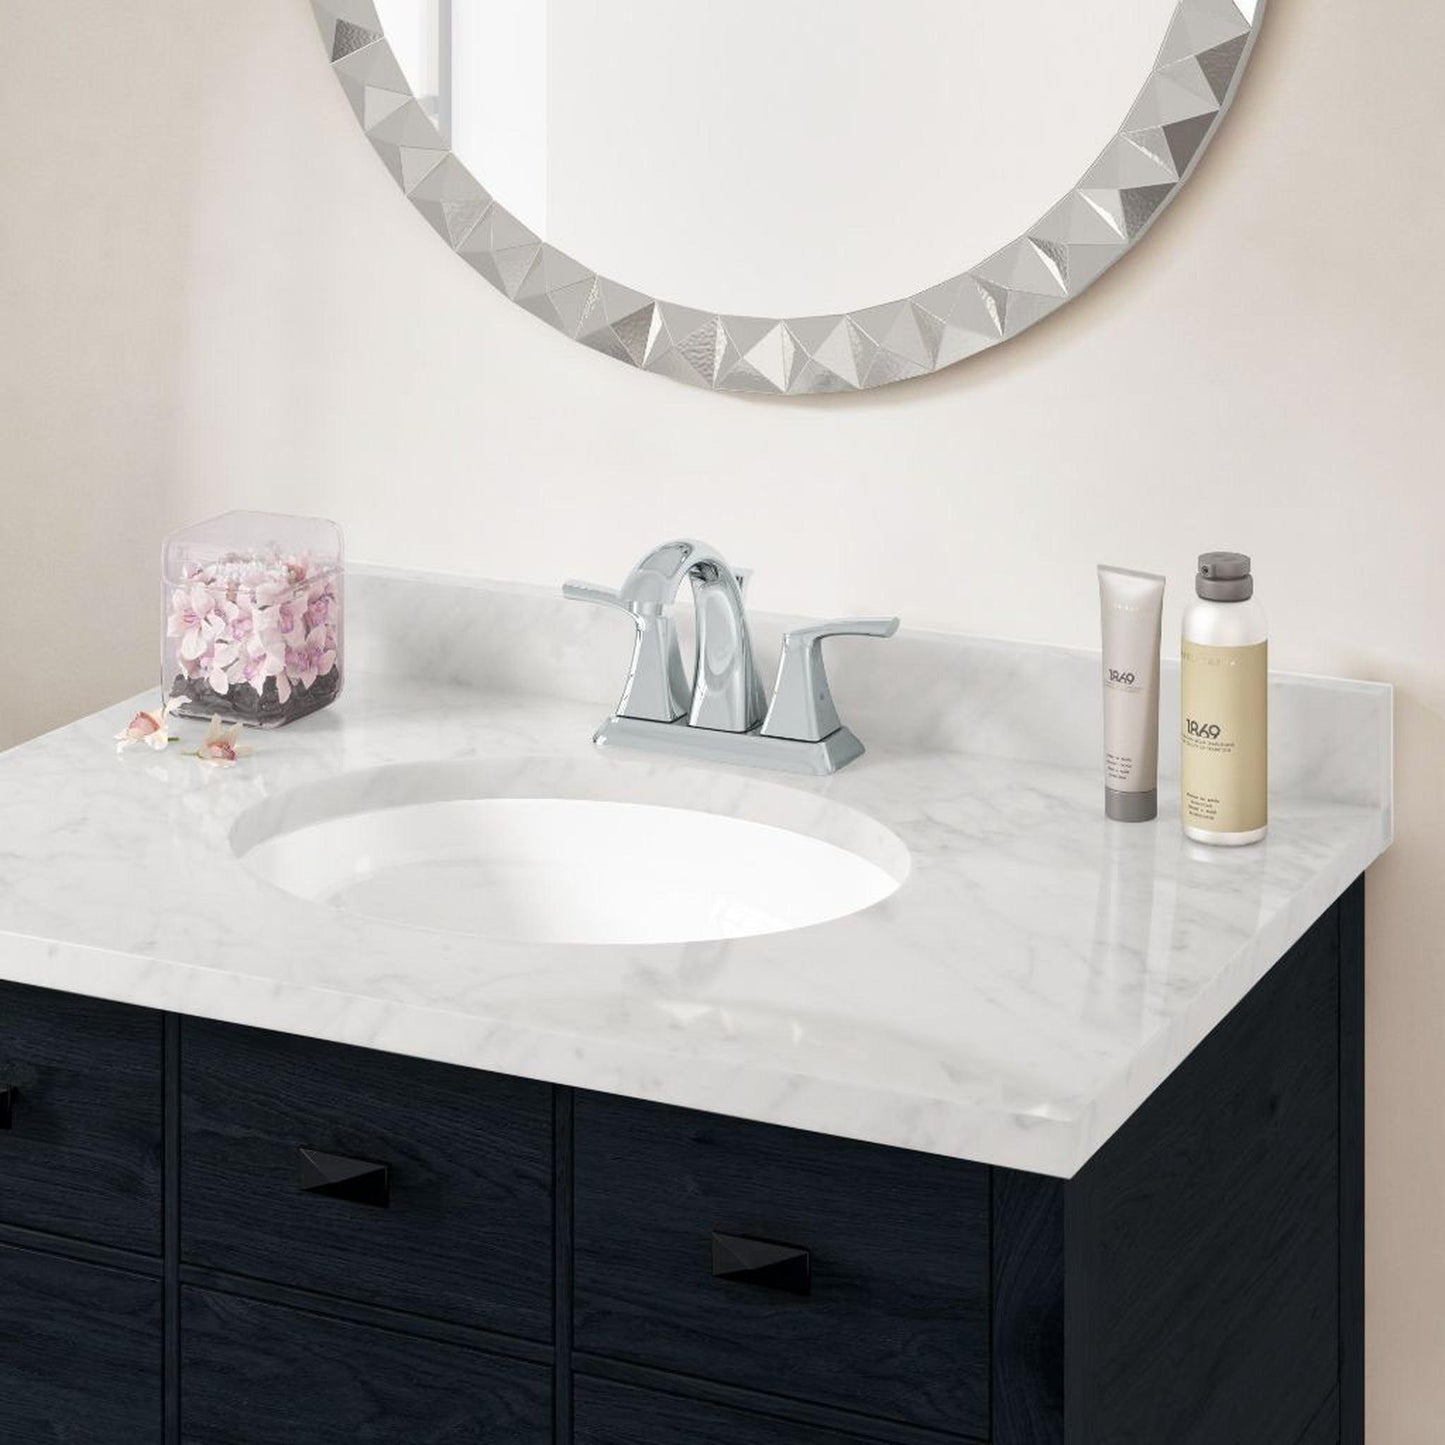 Allora USA 17.375" X 14.375" Vitreous China White Oval Porcelain Undermount Sink With Overflow